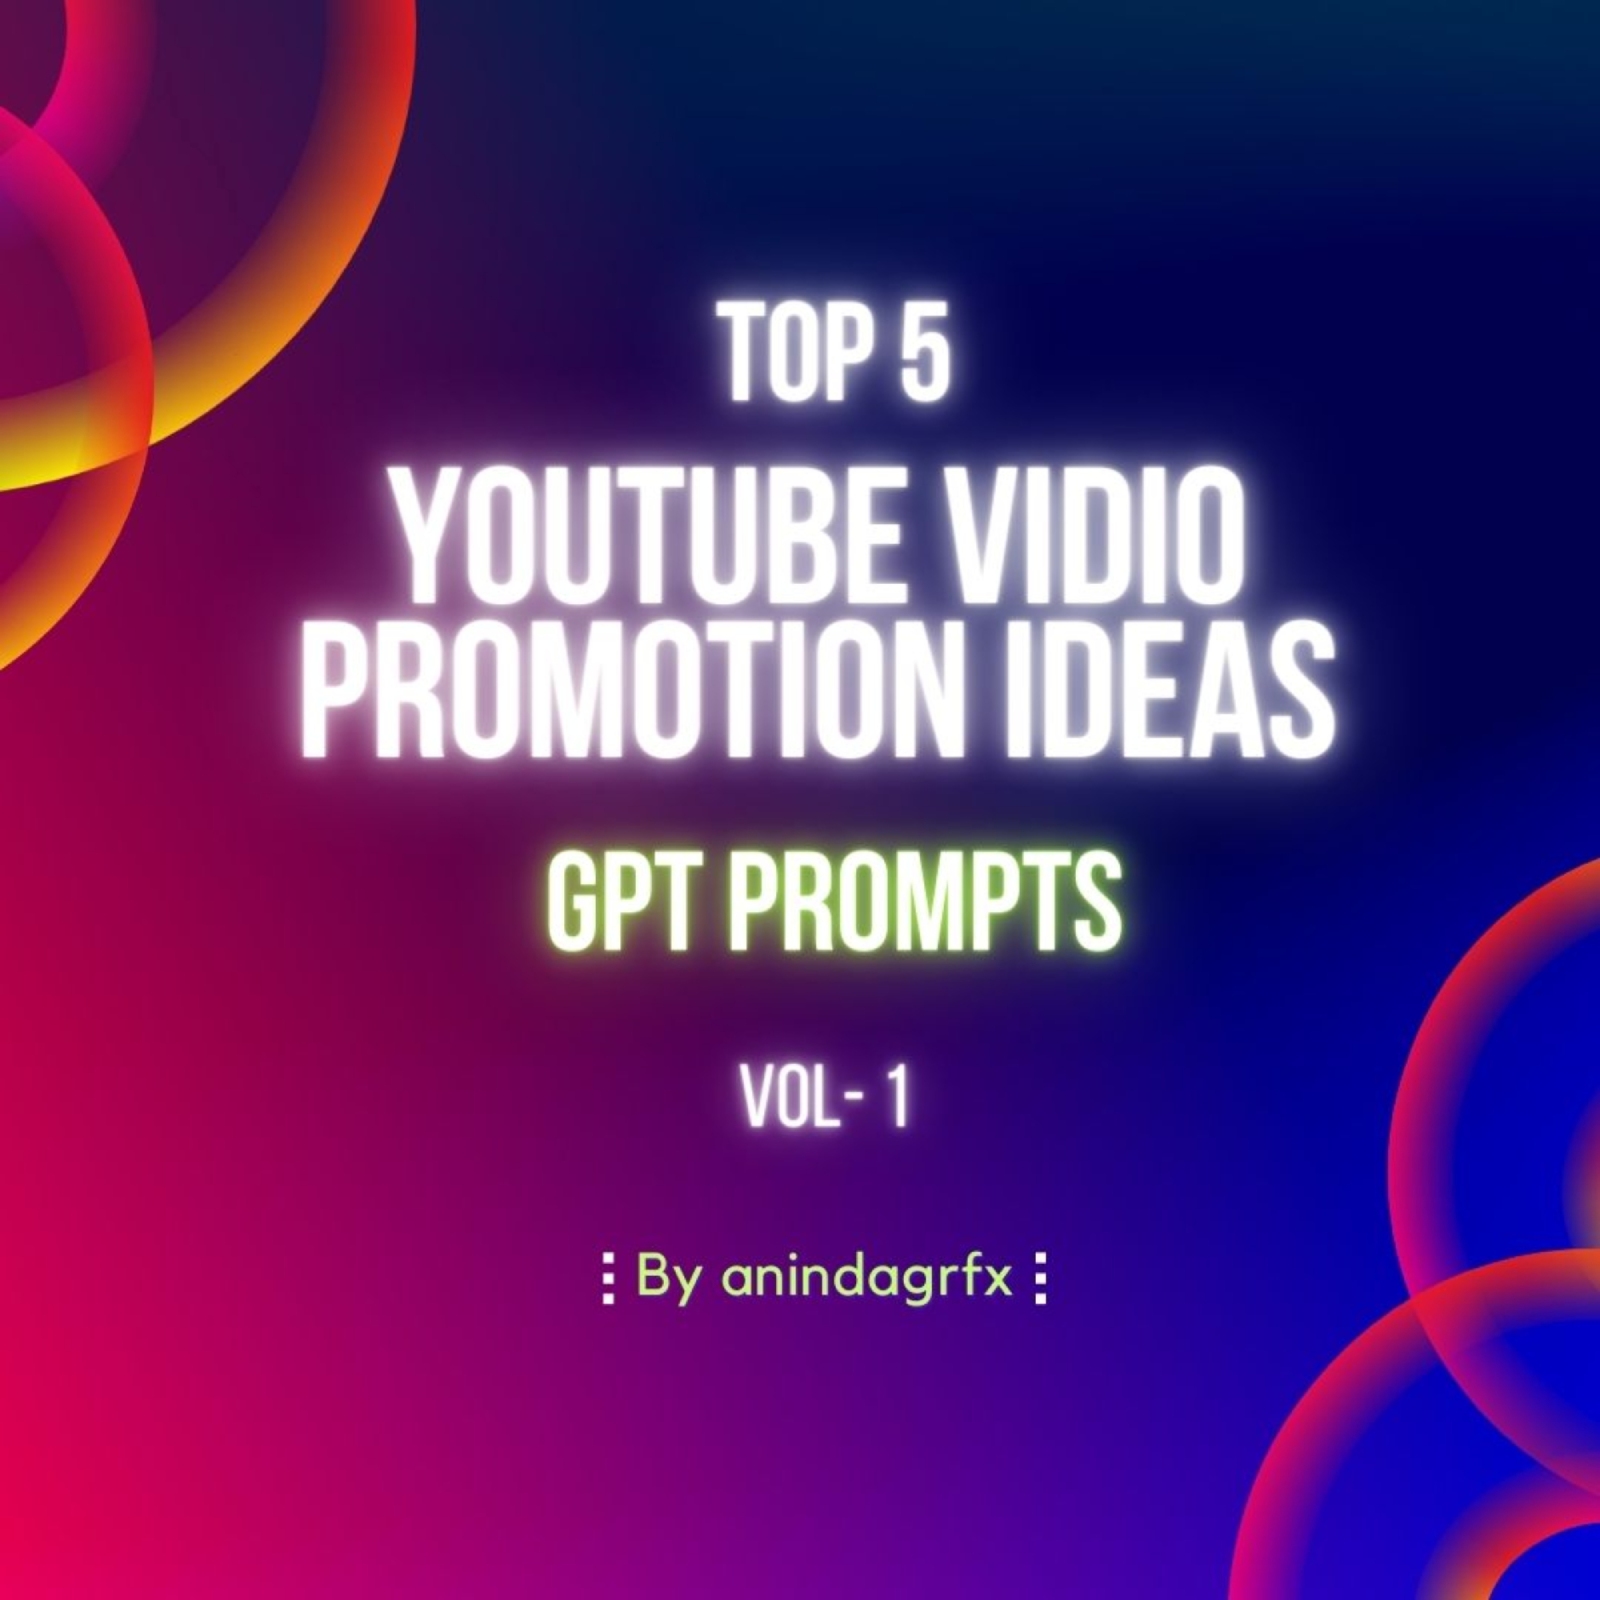 Top 5 youtube vidio promotion ideas GPT prompts Vol 1 preview image.